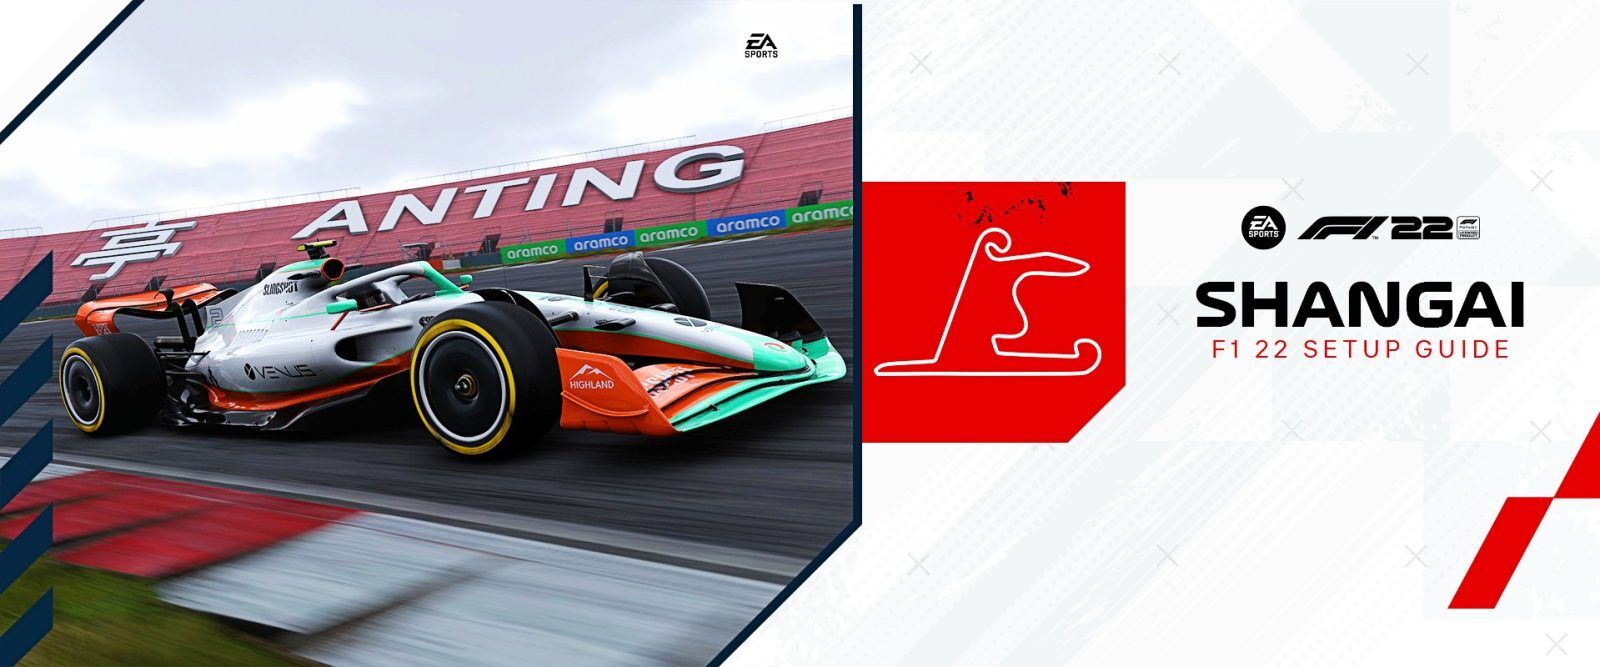 An image of a custom-liveried F1 car in F1 22 driving in China, alongside a map of the Shanghai international circuit.